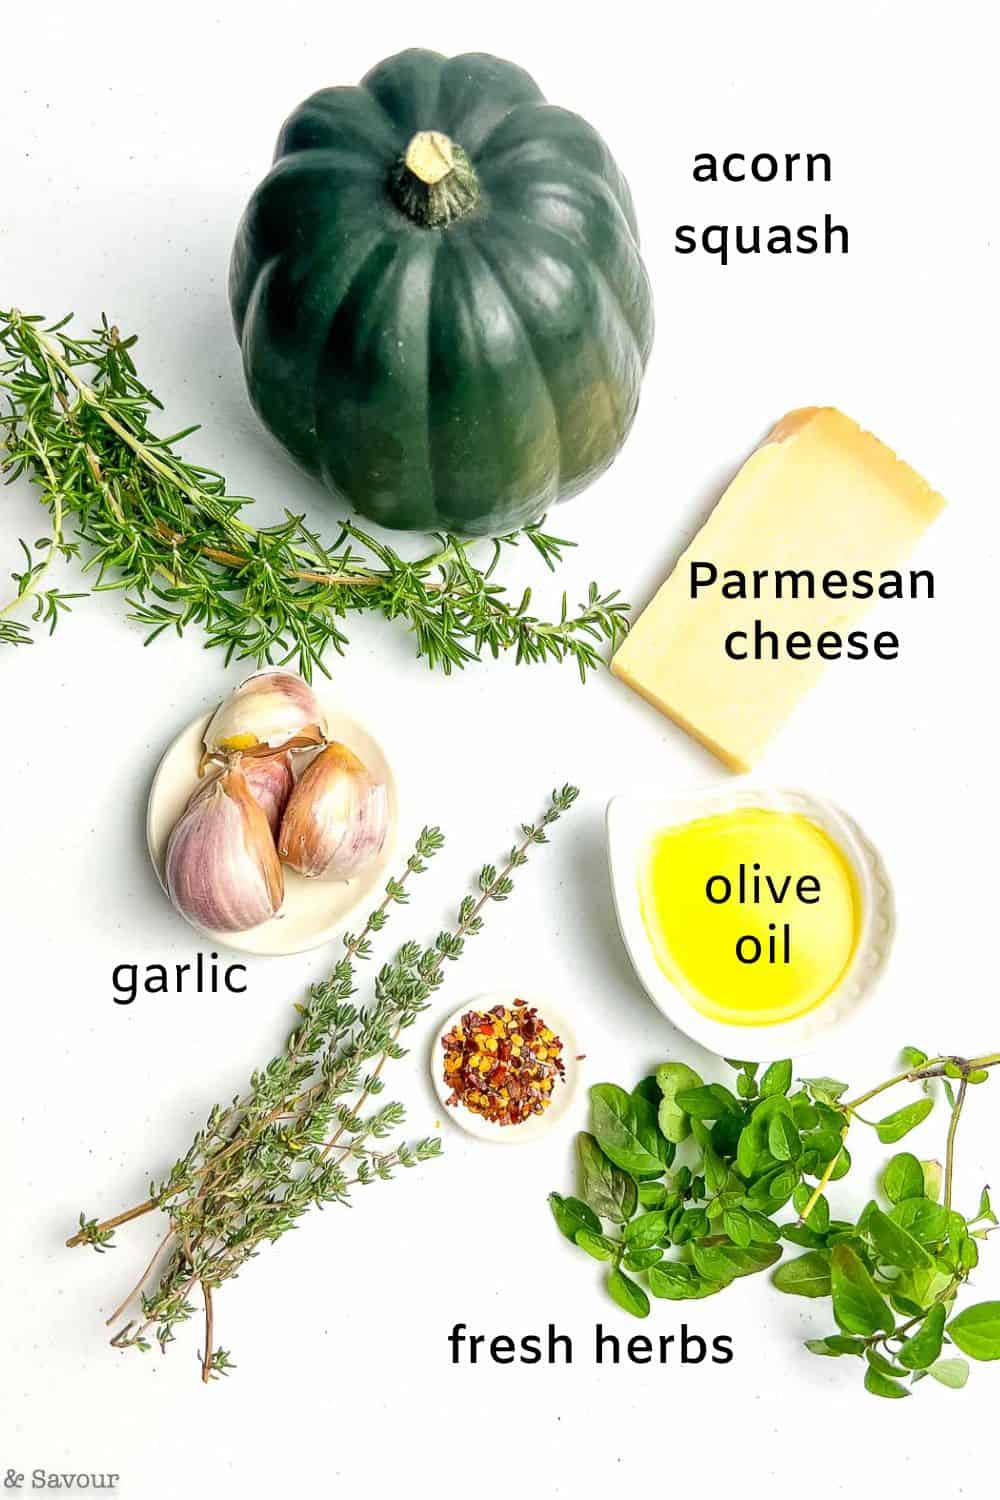 Ingredients with labels for garlic parmesan roasted acorn squash.